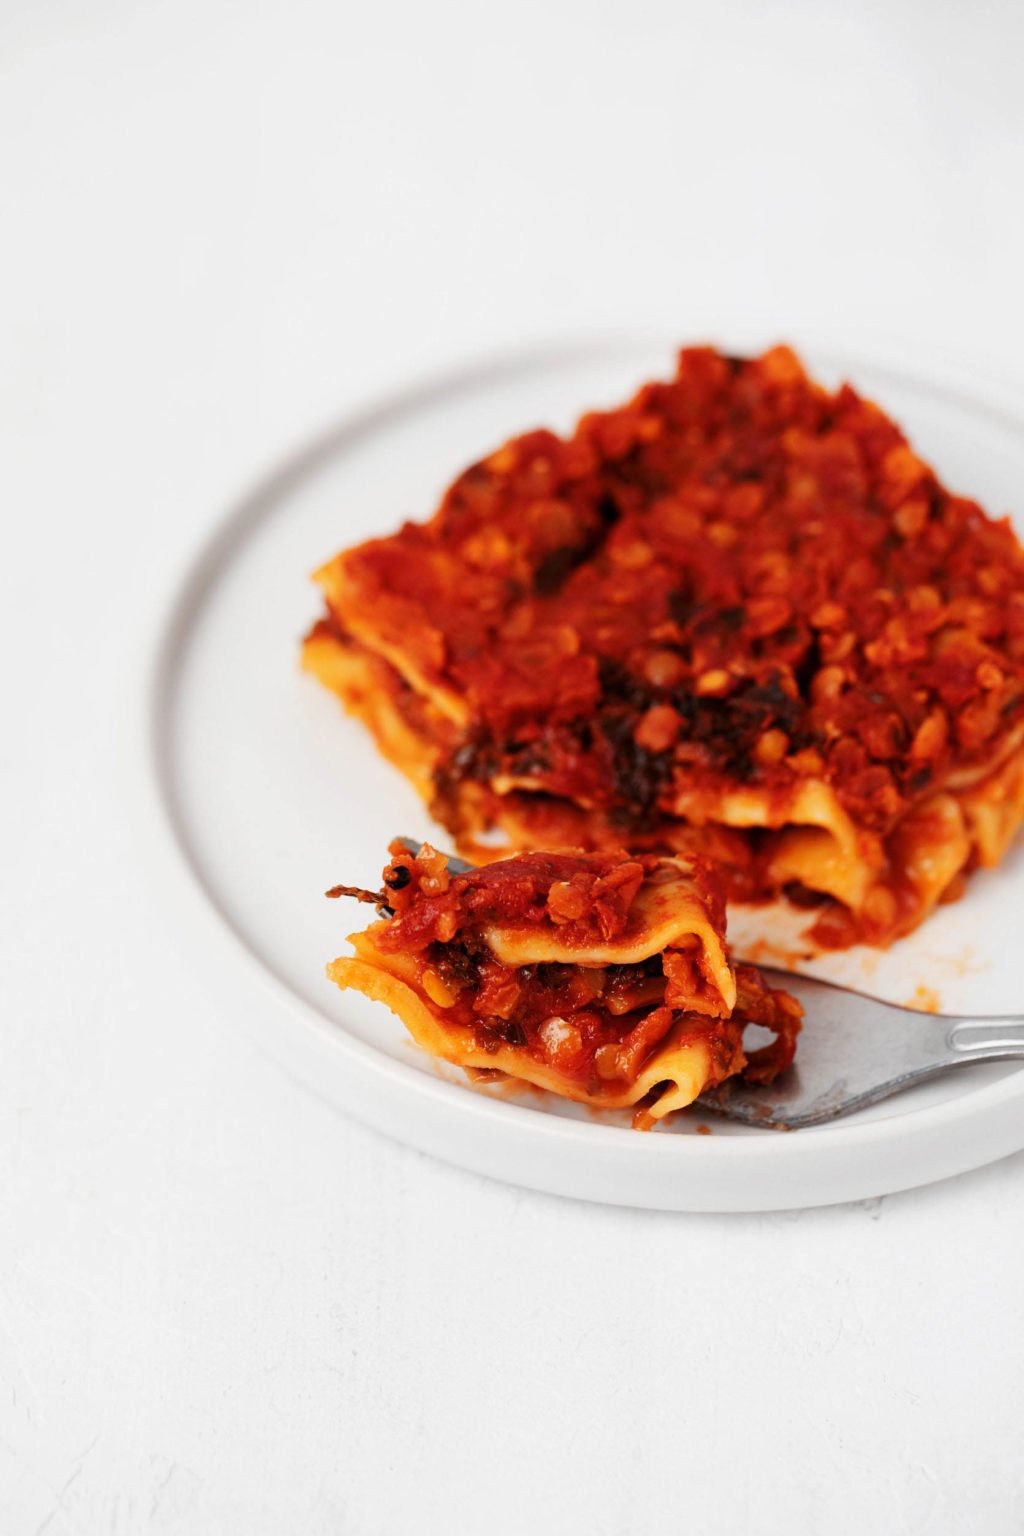 A slice of vegan lasagna with lentils and kale has just been cut into with a fork. It rests on a small, white plate.